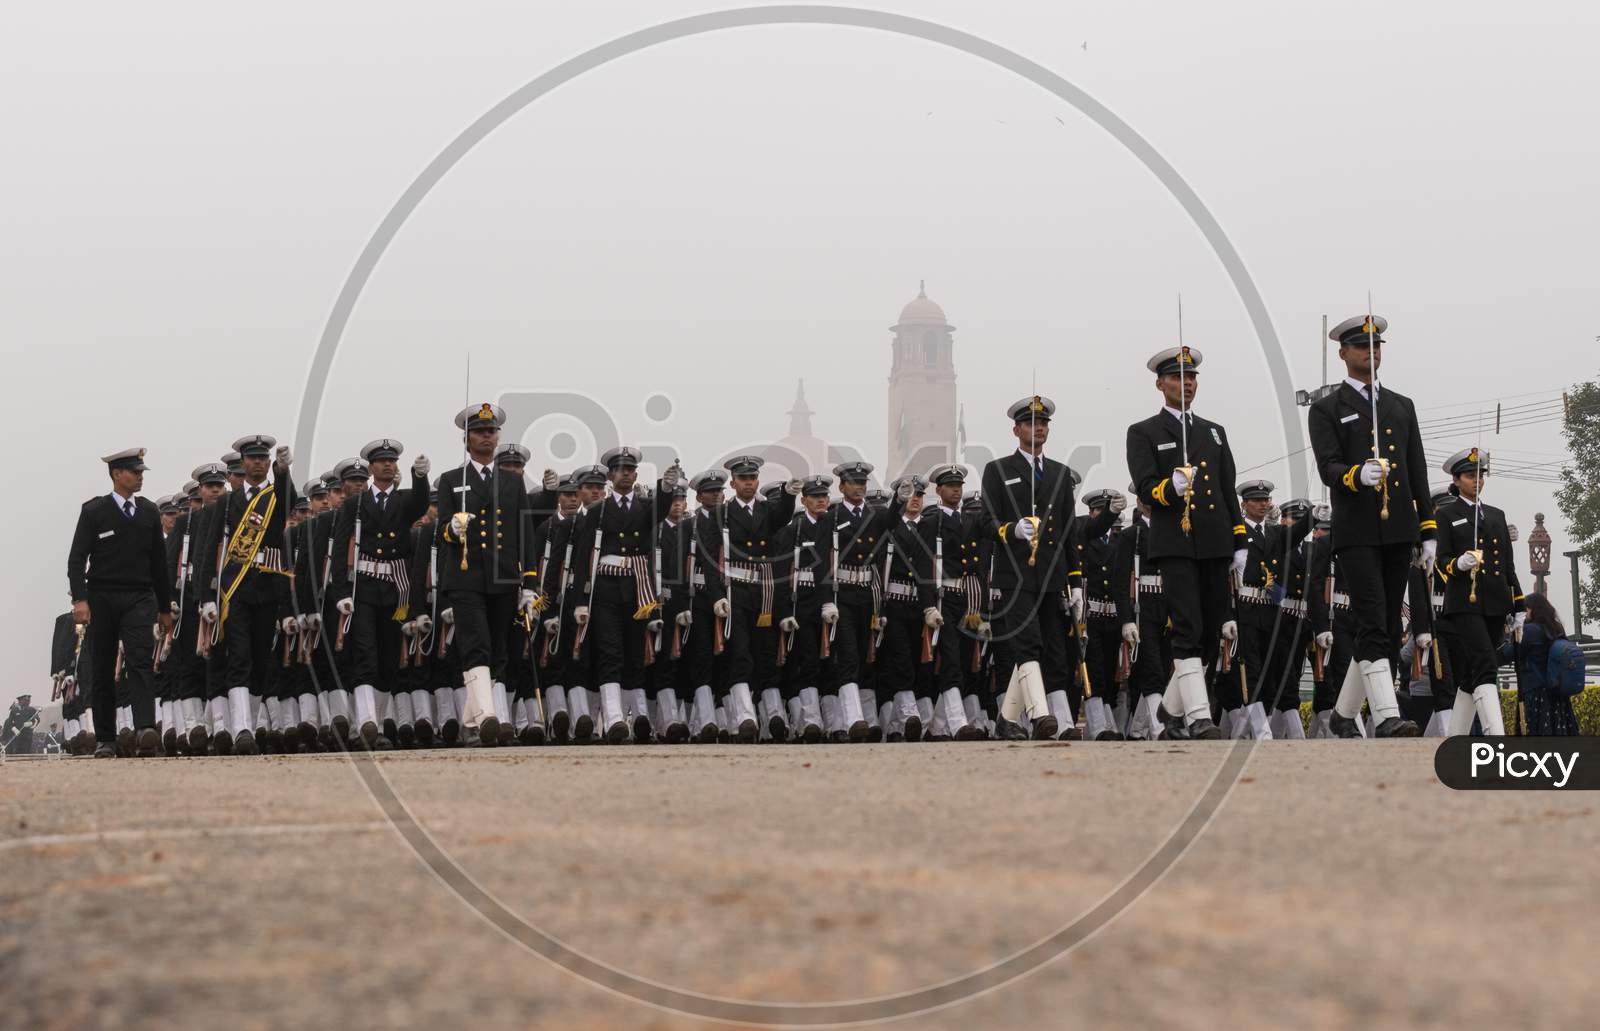 Indian Navy, the naval branch of the Indian Armed Forces, Doing parade rehearsal for 71st Republic Day 2020